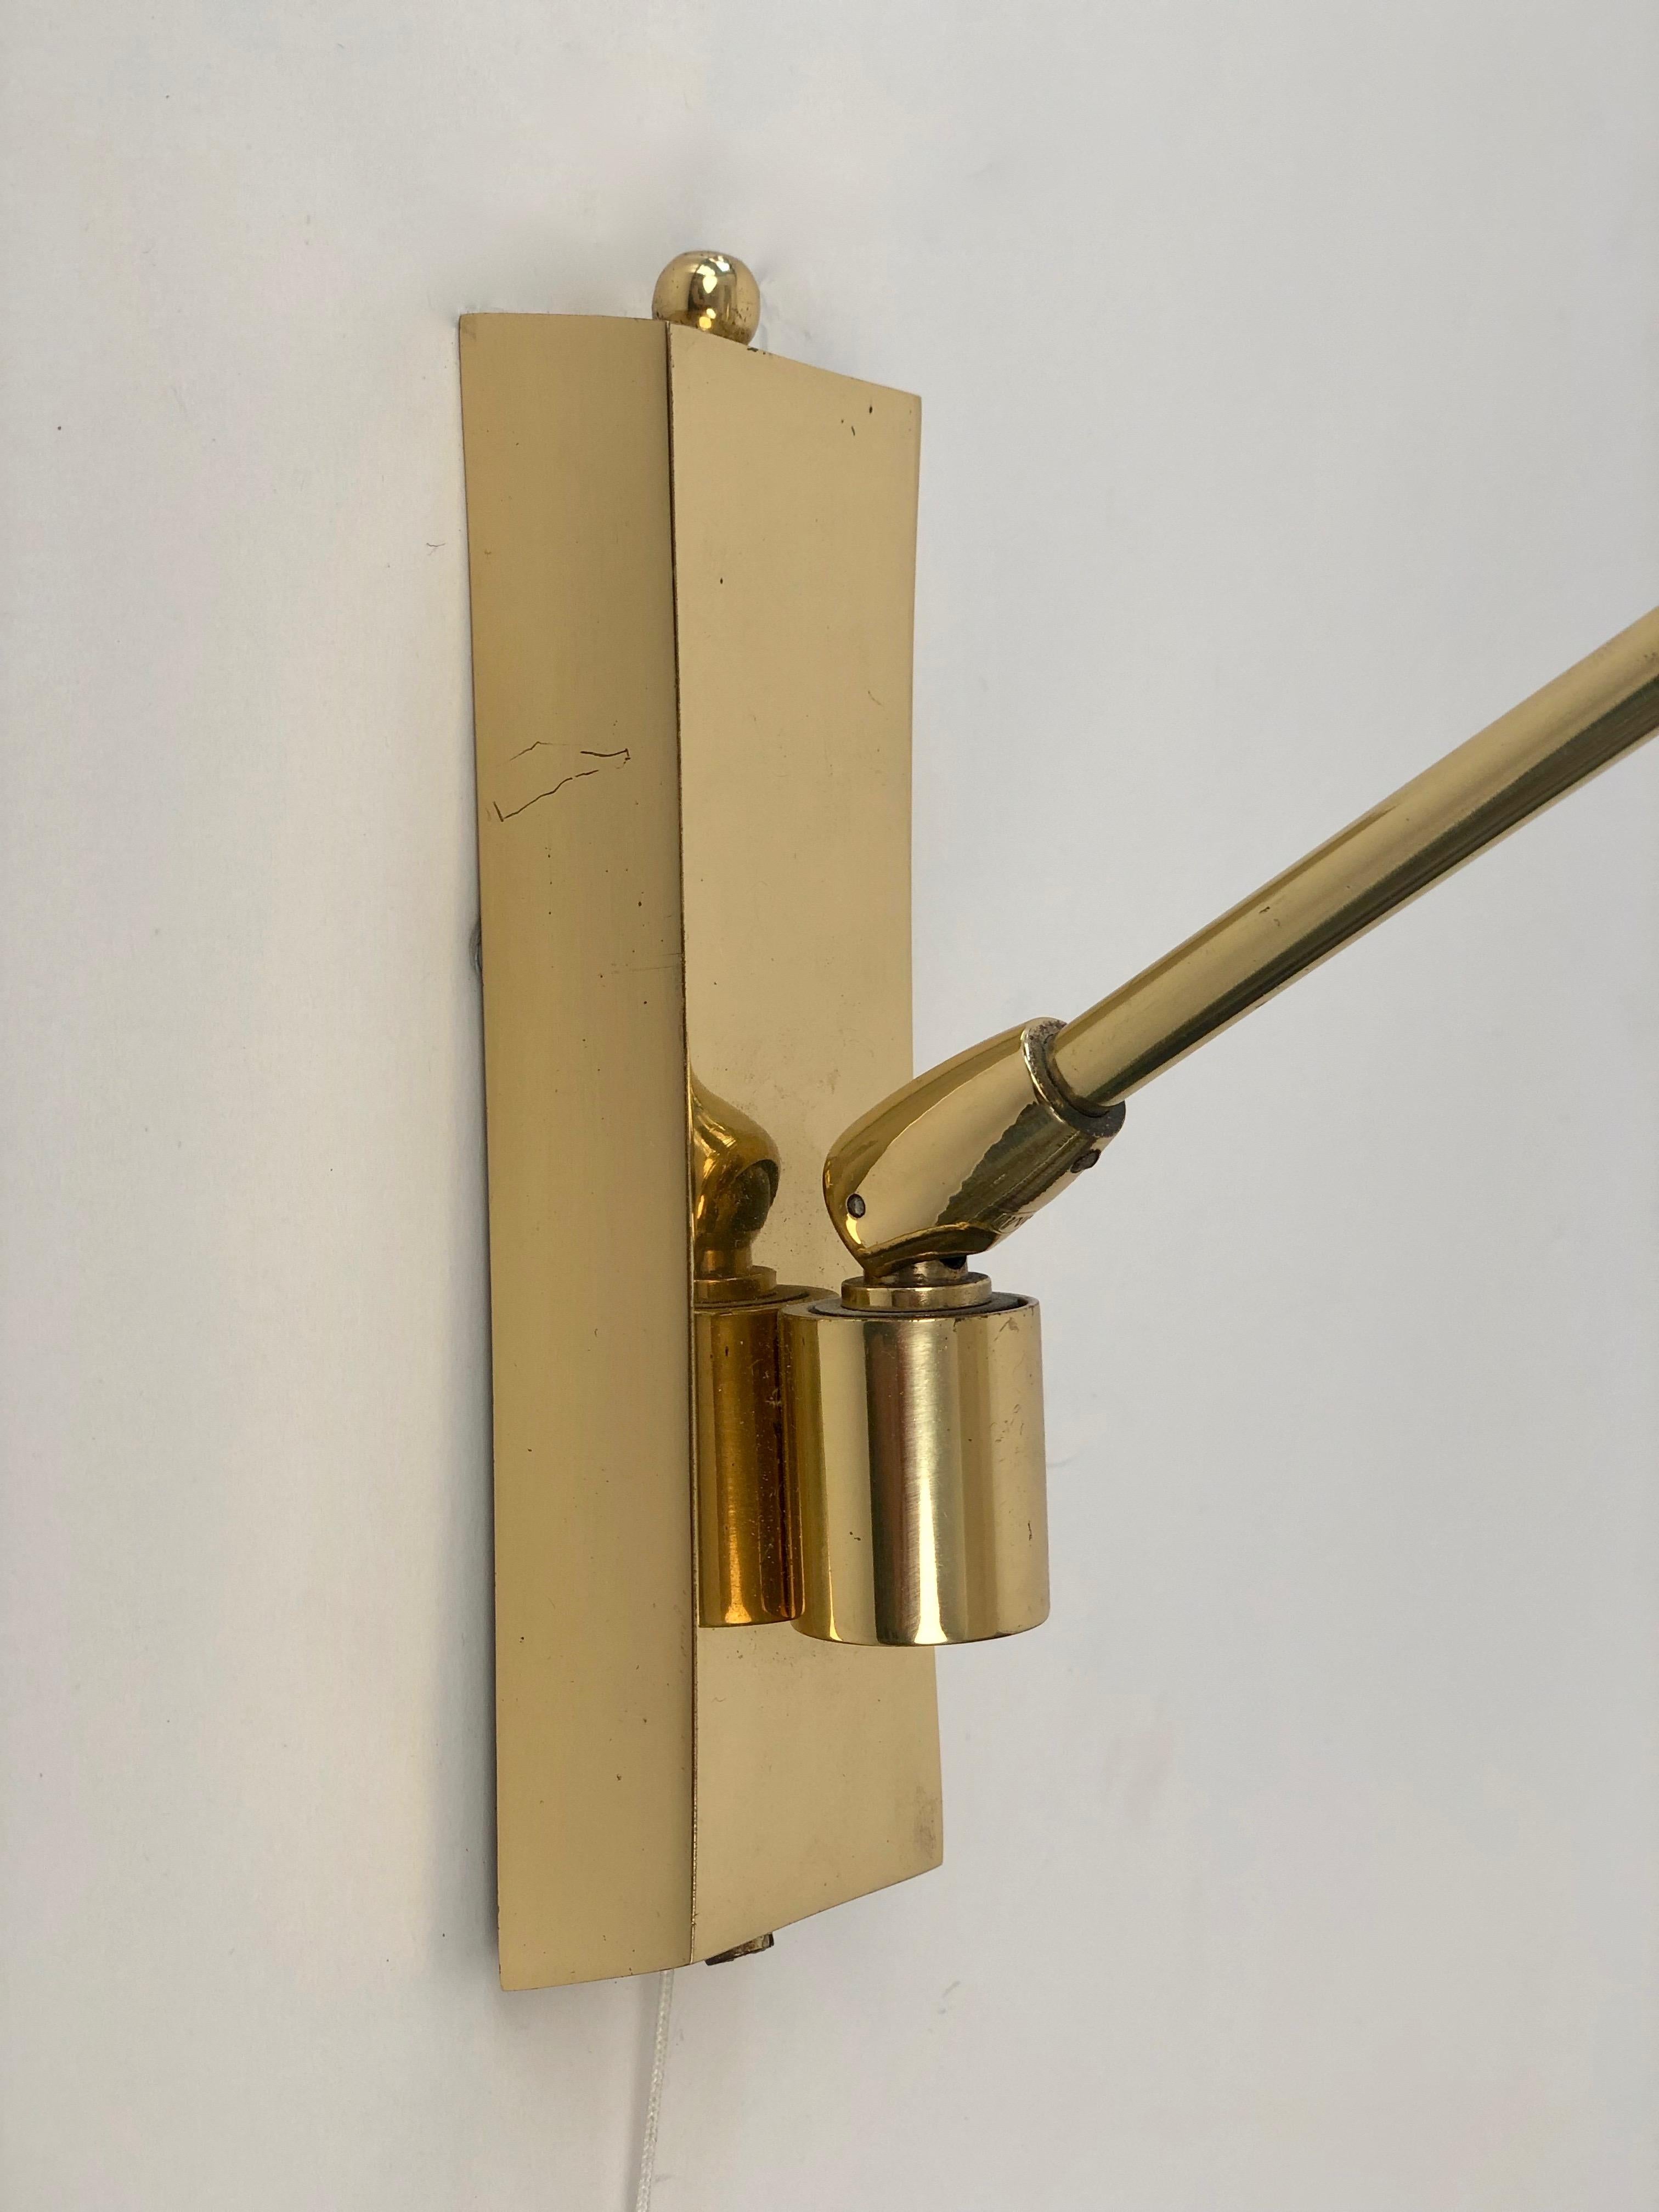 Polished Adjustable Wall Light in Brass with Linen Shade 1960, Austria